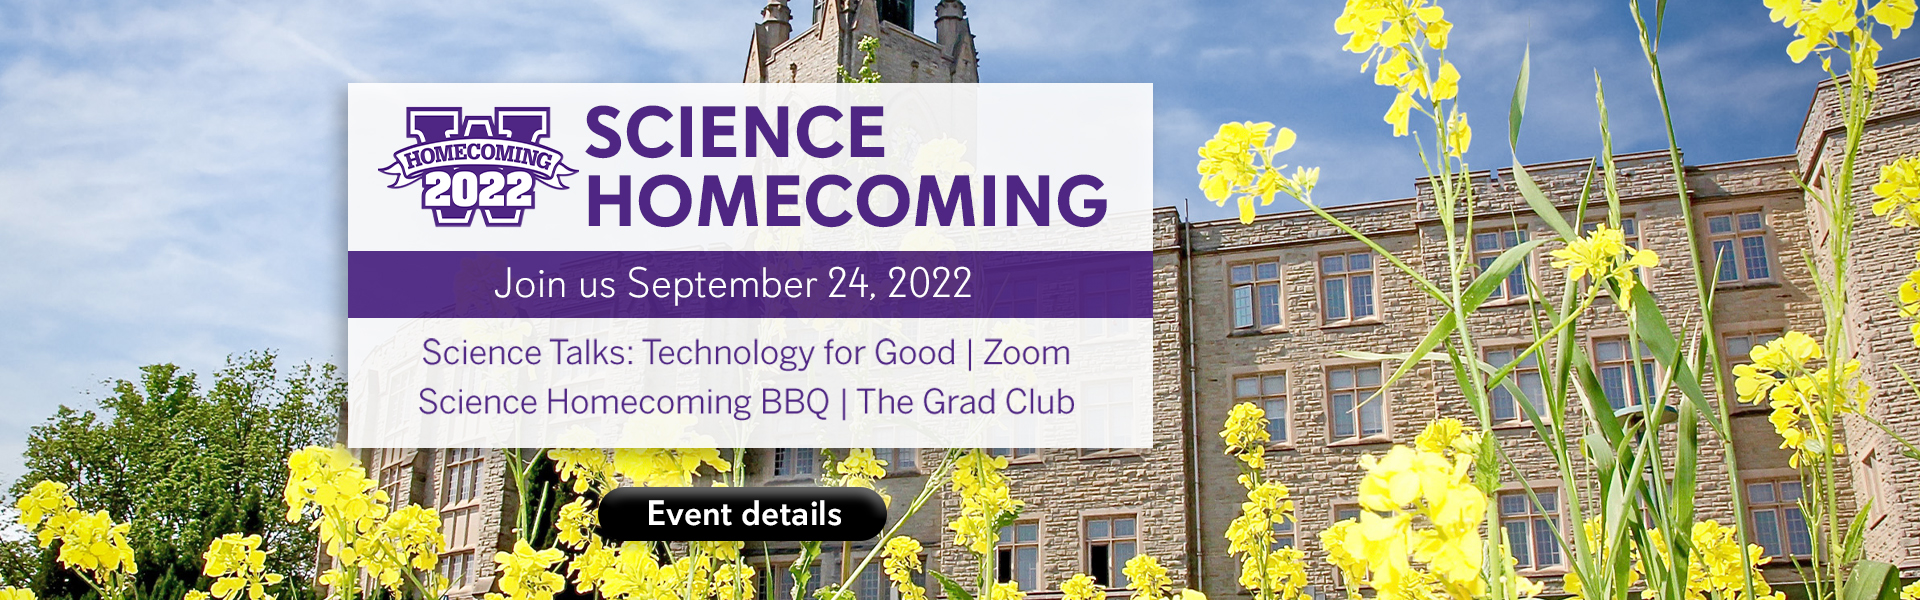 Western Science Homecoming Event Details